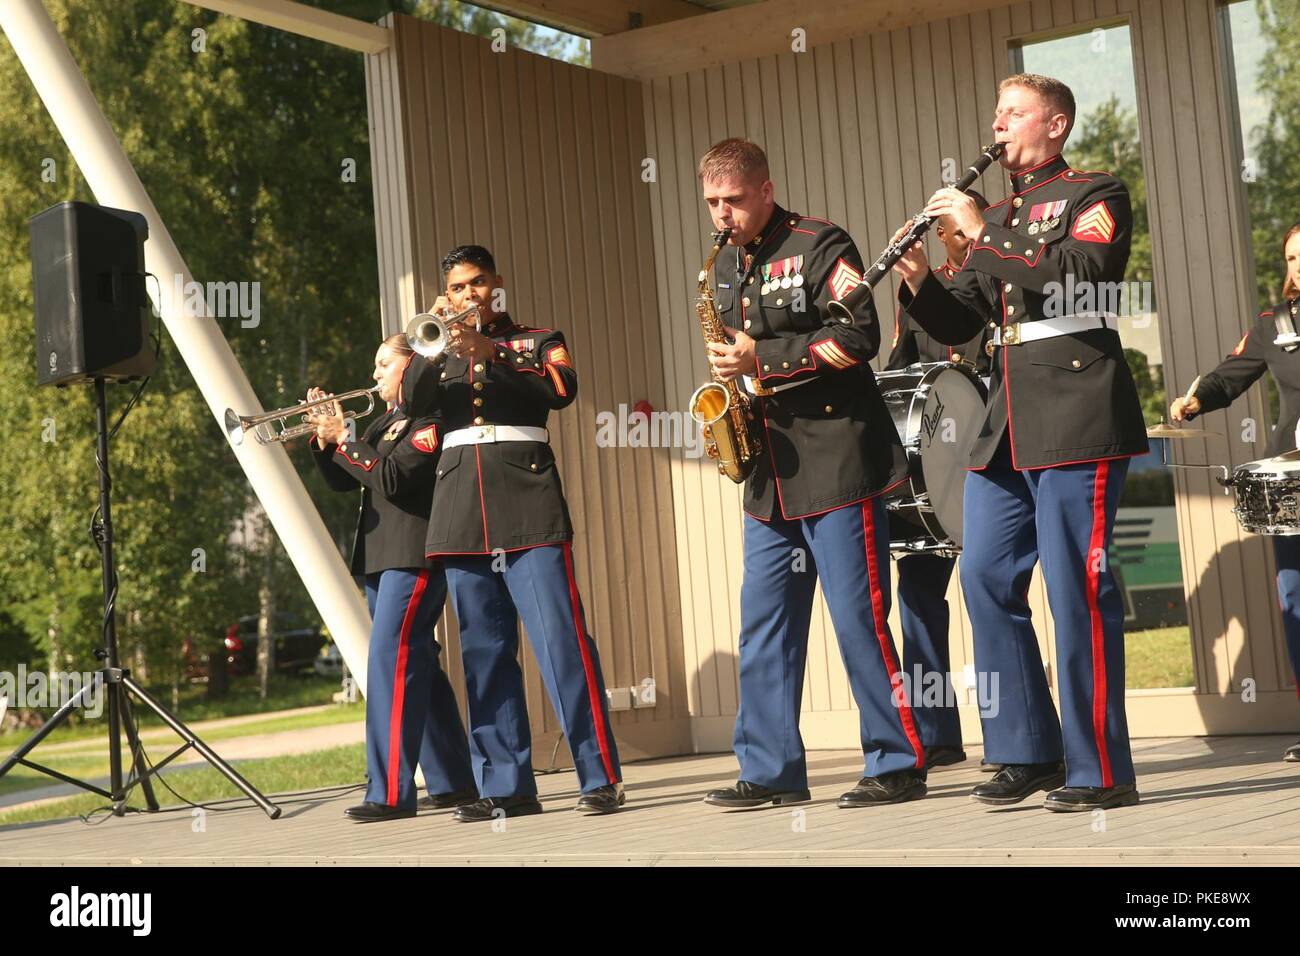 U.S. Marines with the Marine Corps Base Quantico band perform during a concert at Kesaheina, Mantyharju, Finland, July 29, 2018. The band continues to perform at different locations around Finland as they prepare for the 2018 Hamina Tattoo. Stock Photo